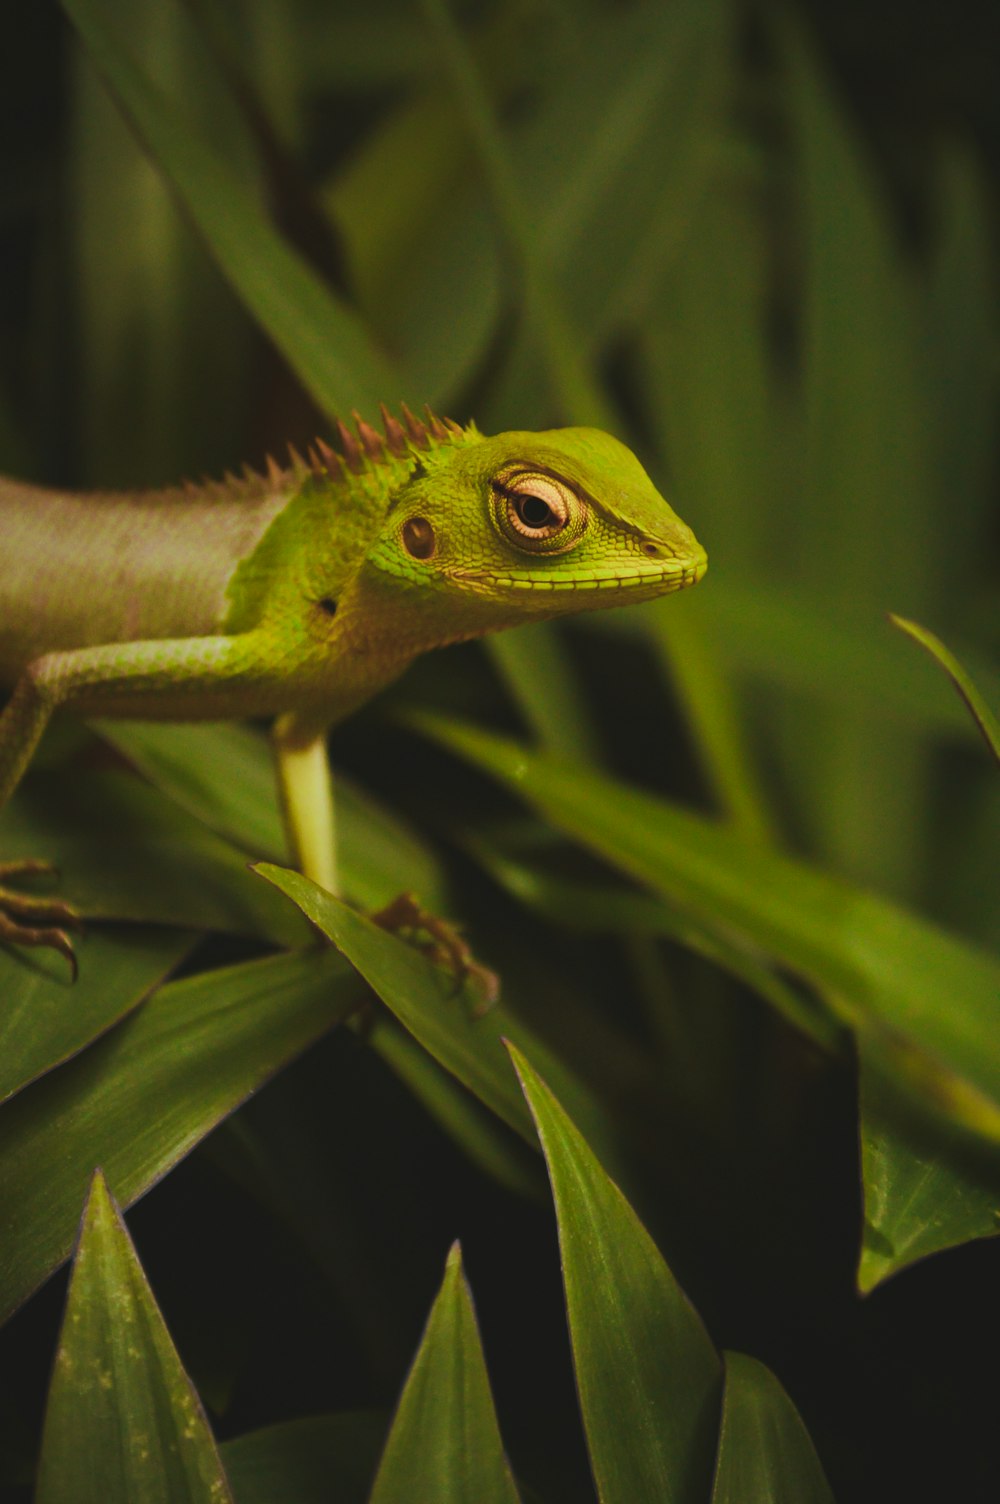 green reptile on grass